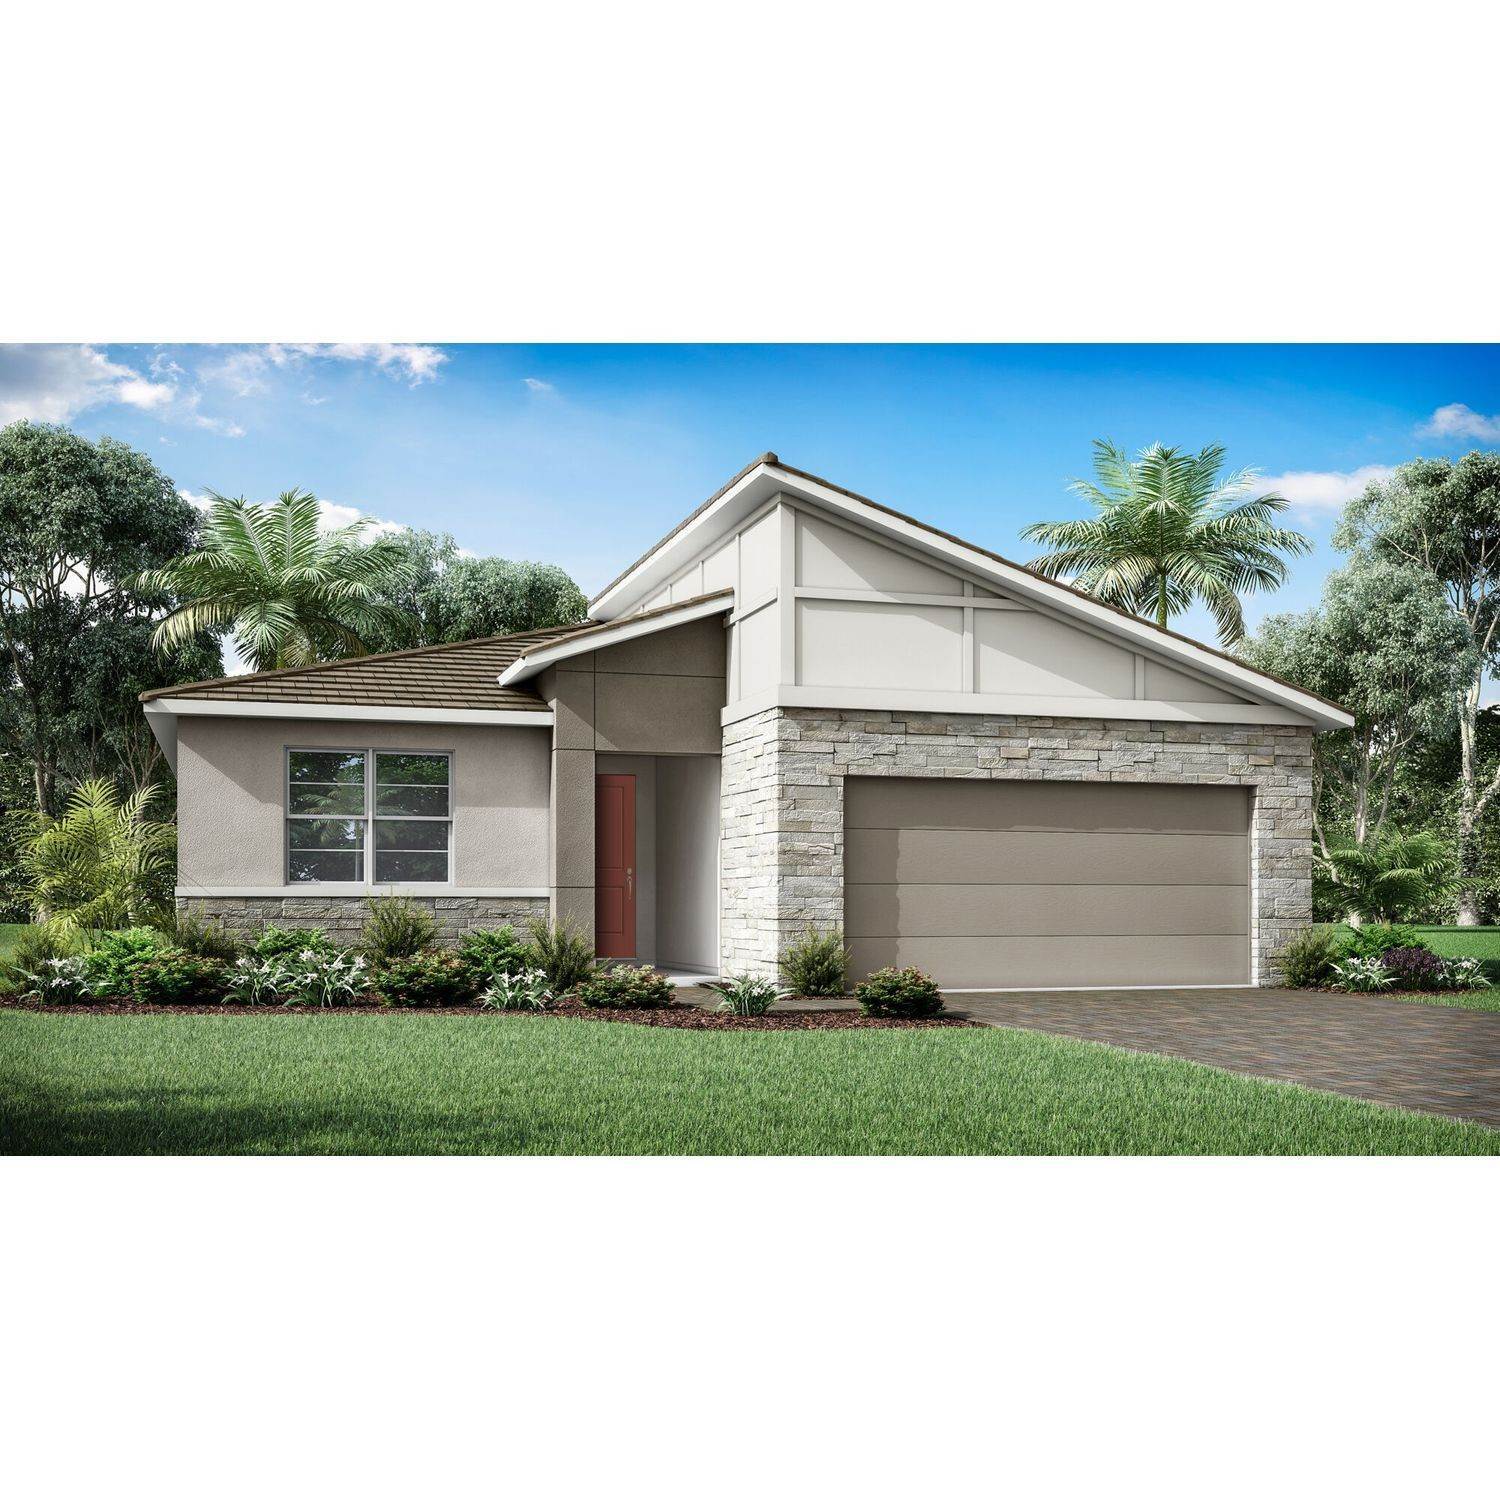 Single Family for Sale at Kissimmee, FL 34747